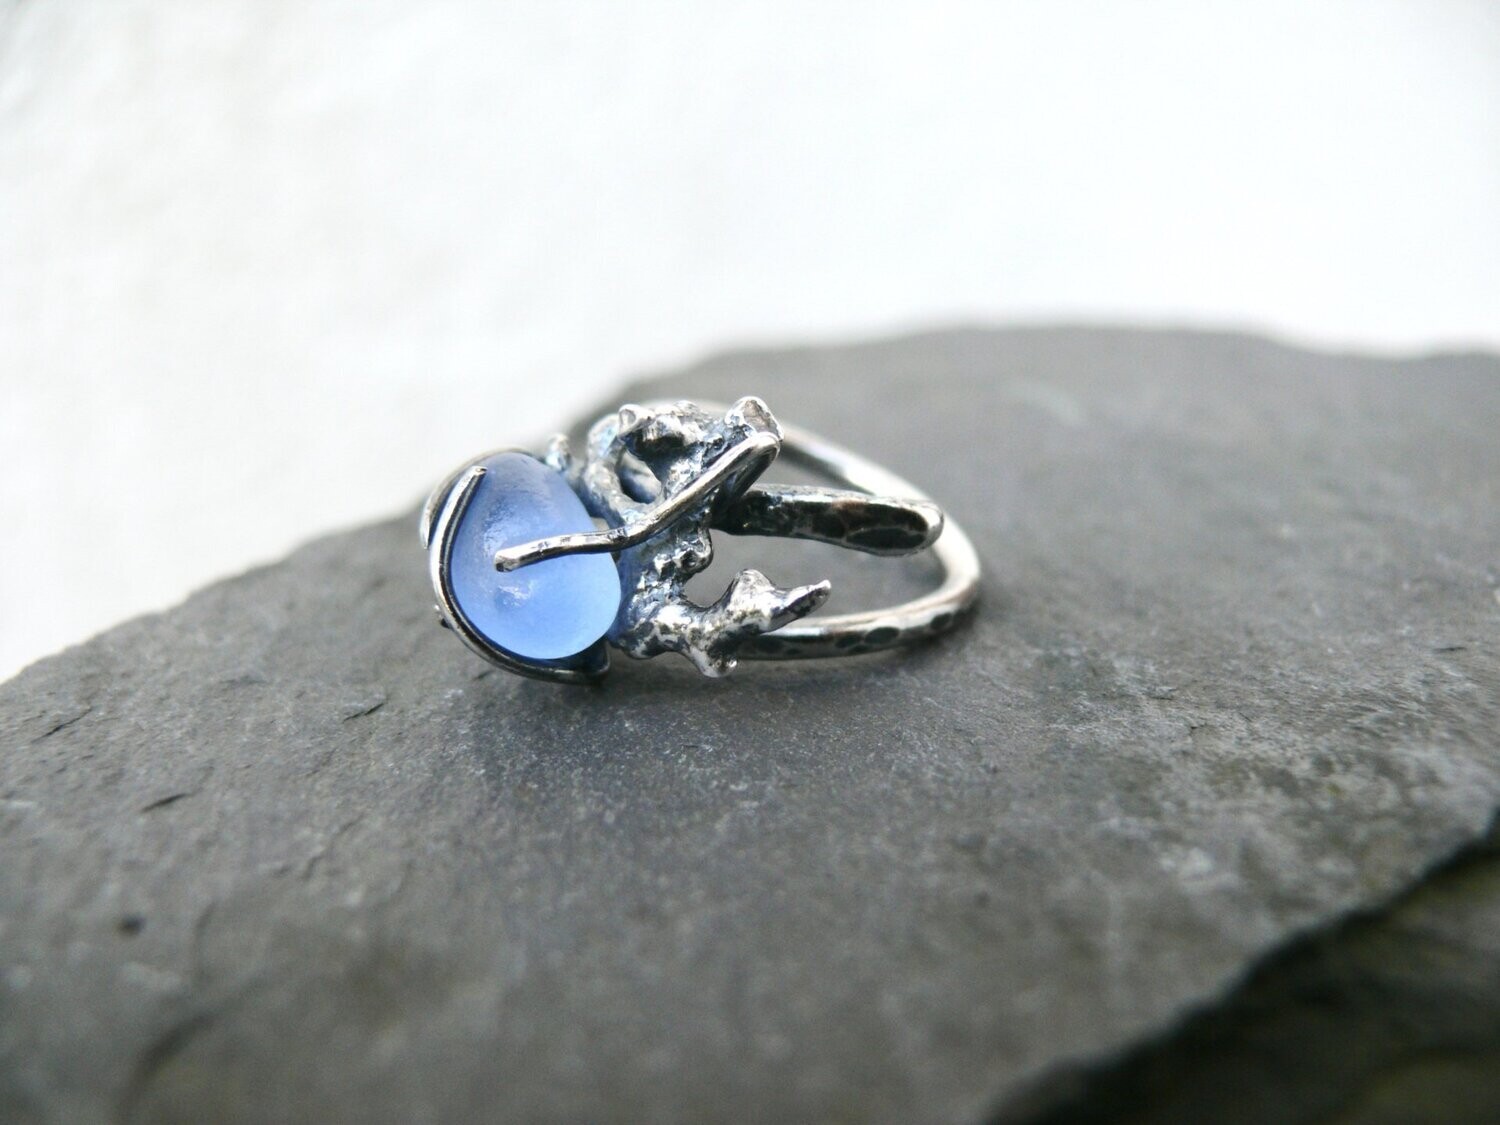 Elemental Sea Witch 3 Ring